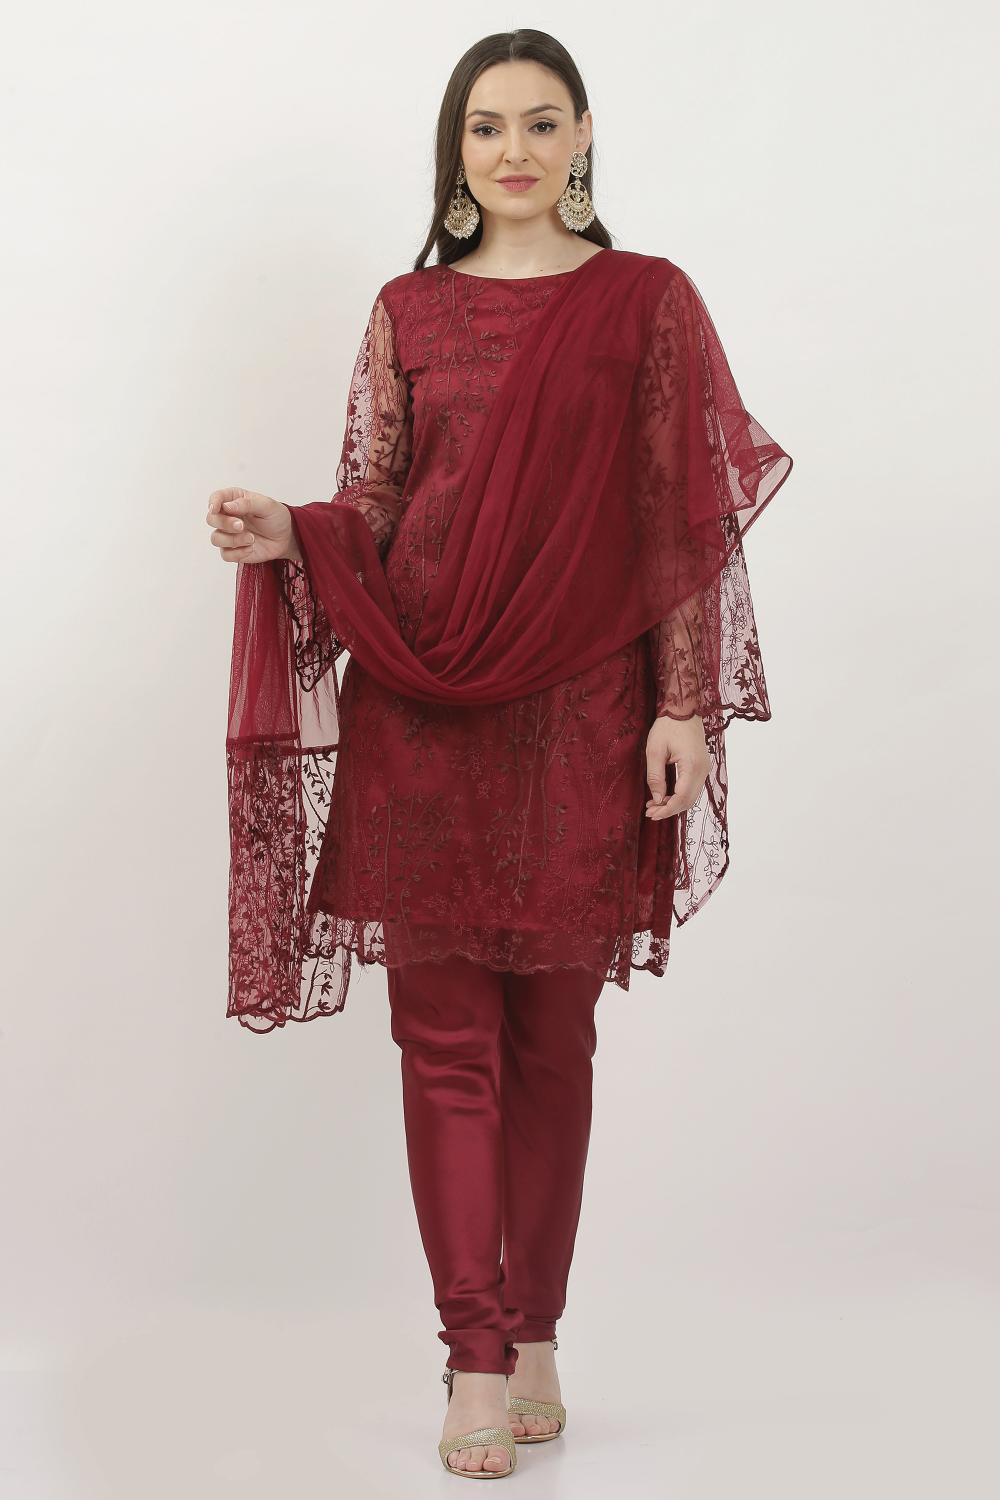 LACE PAKISTANI SUIT IN MAROON WITH PYJAMI